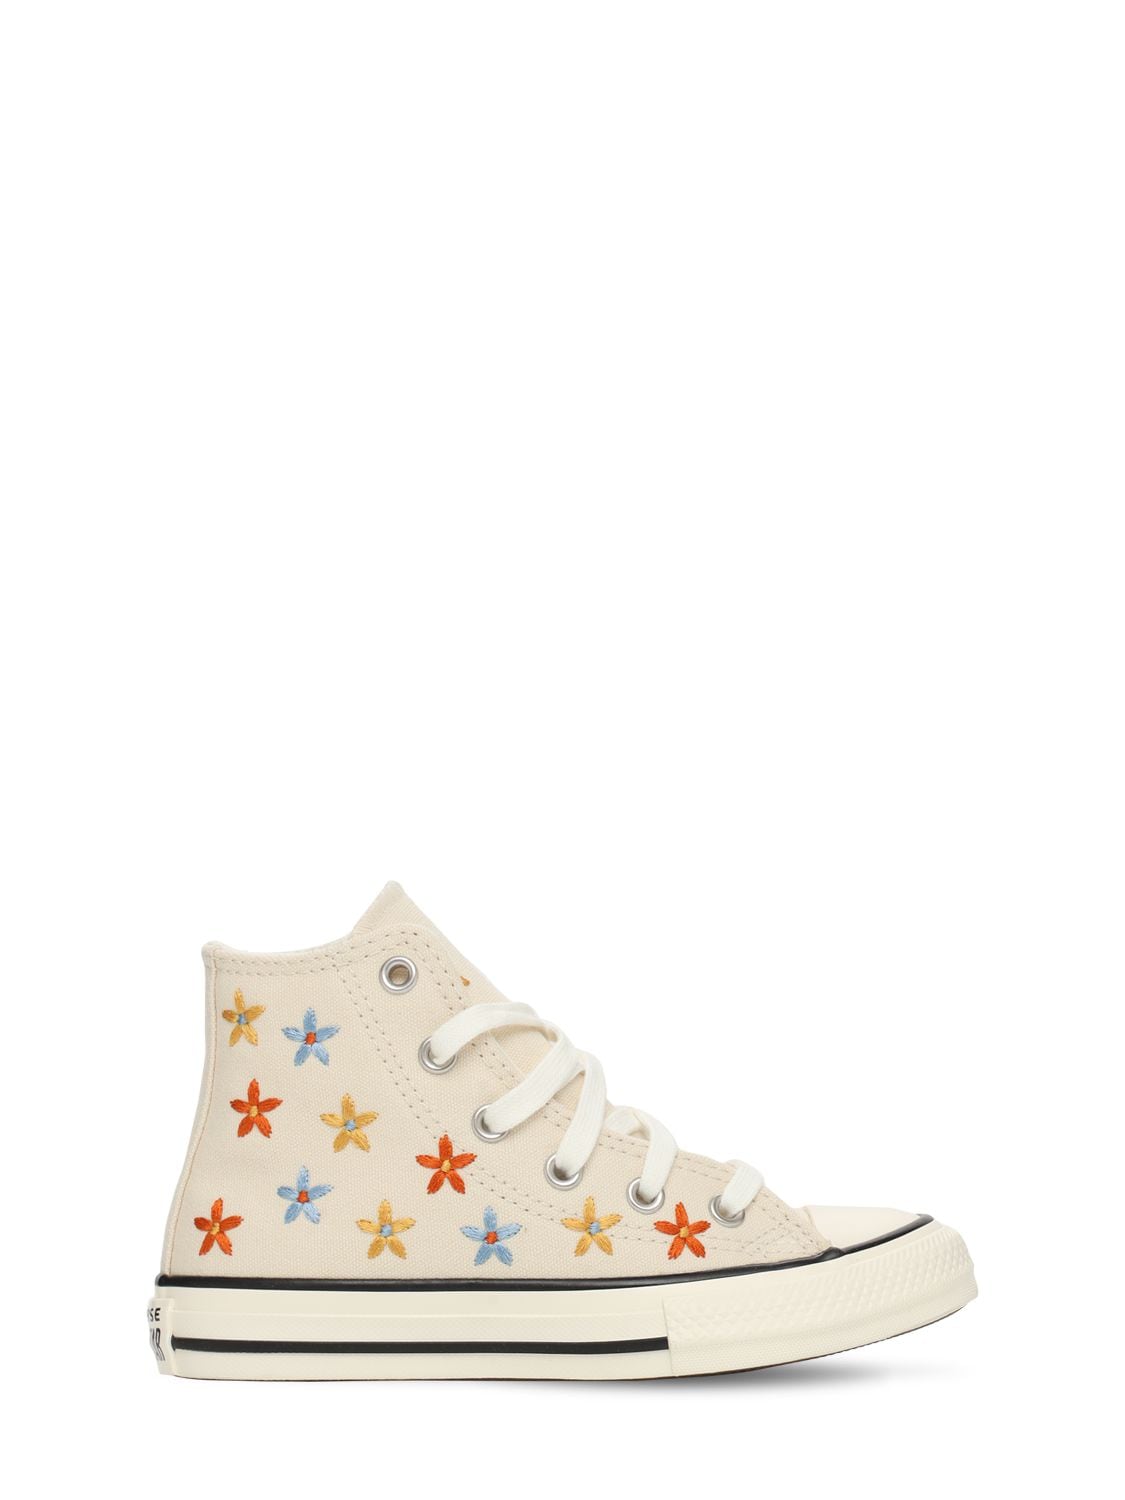 Converse Kids' Chuck 70 High Sneakers In Ivory